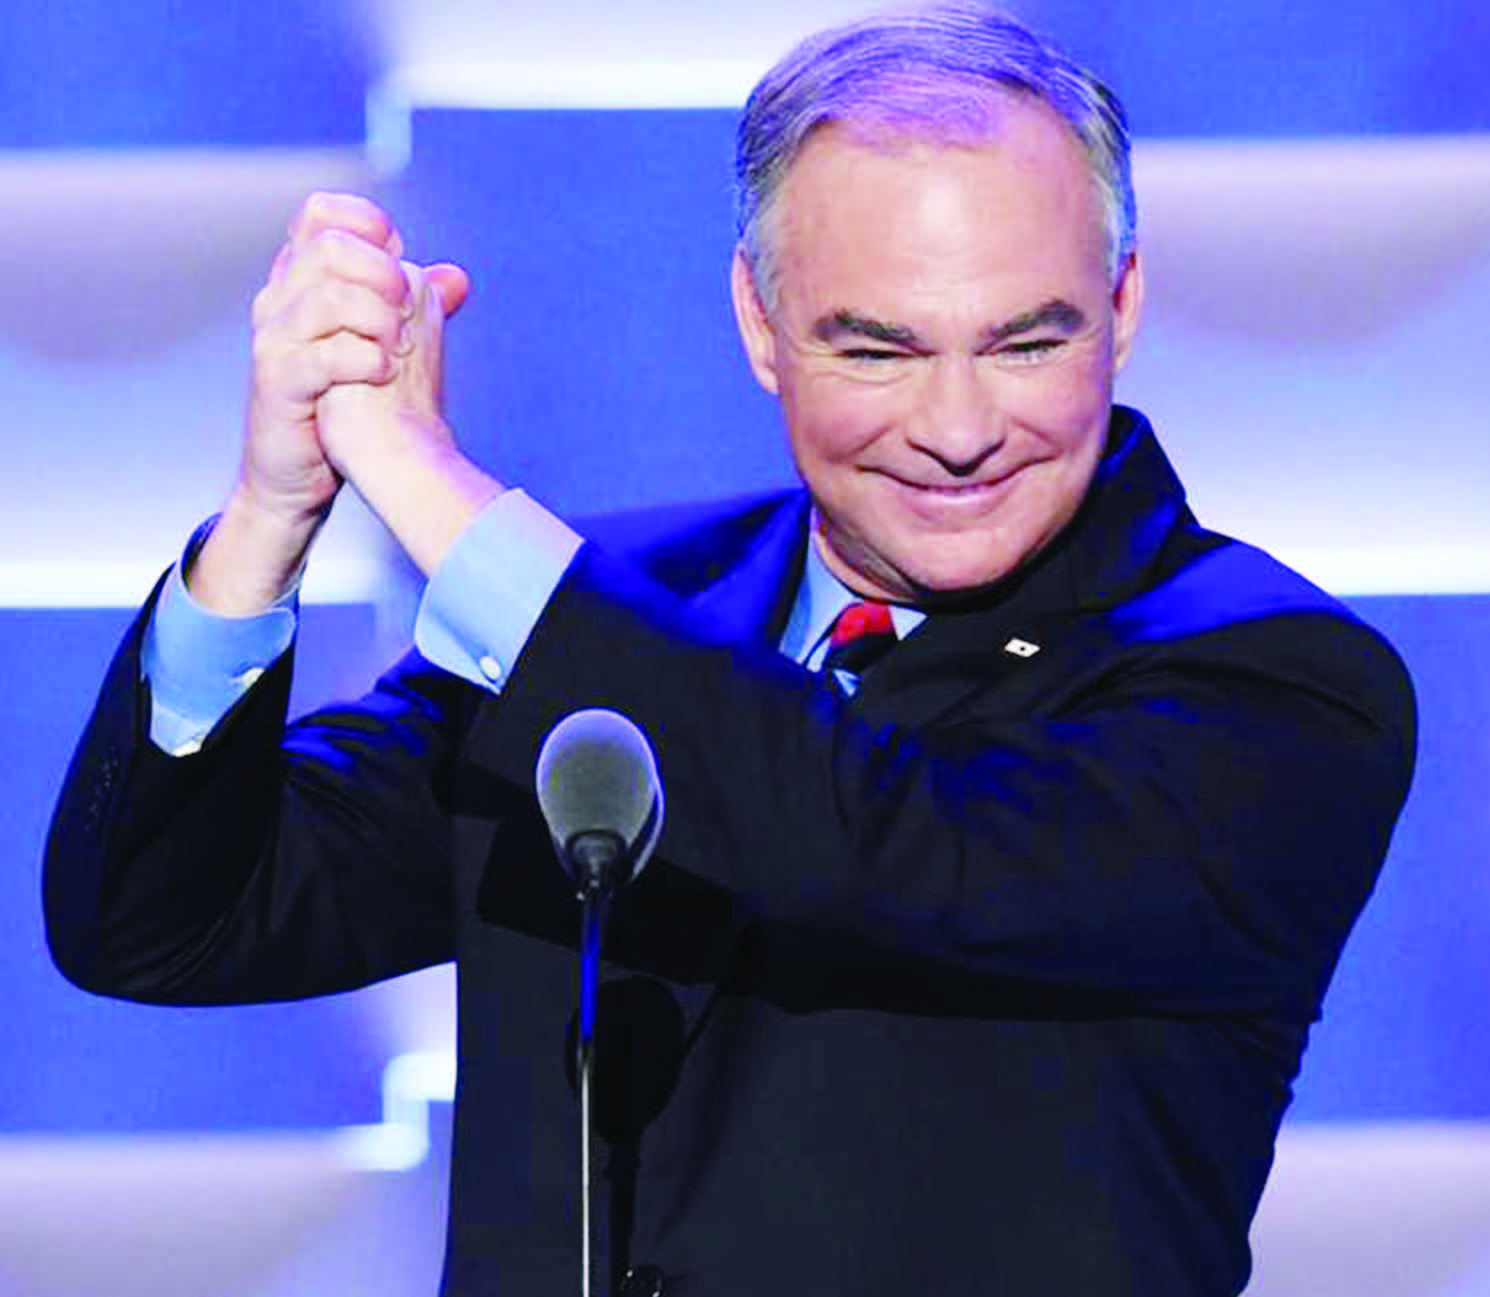 Tim Kaine is the running mate of Hillary Clinton